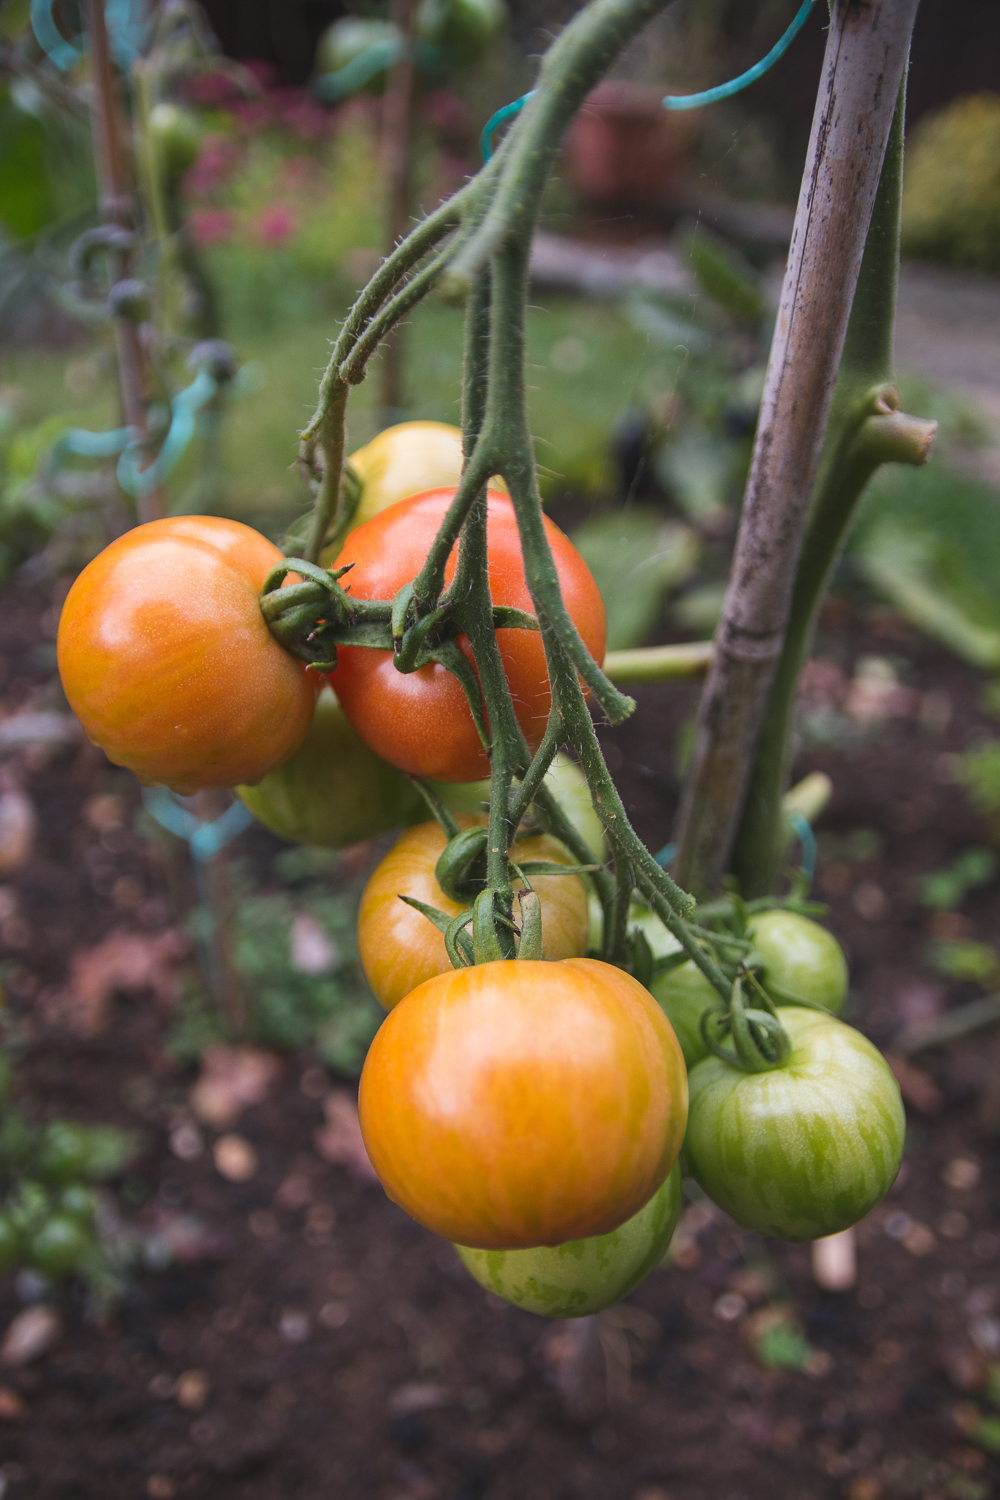 Grow Your Own Tomatoes